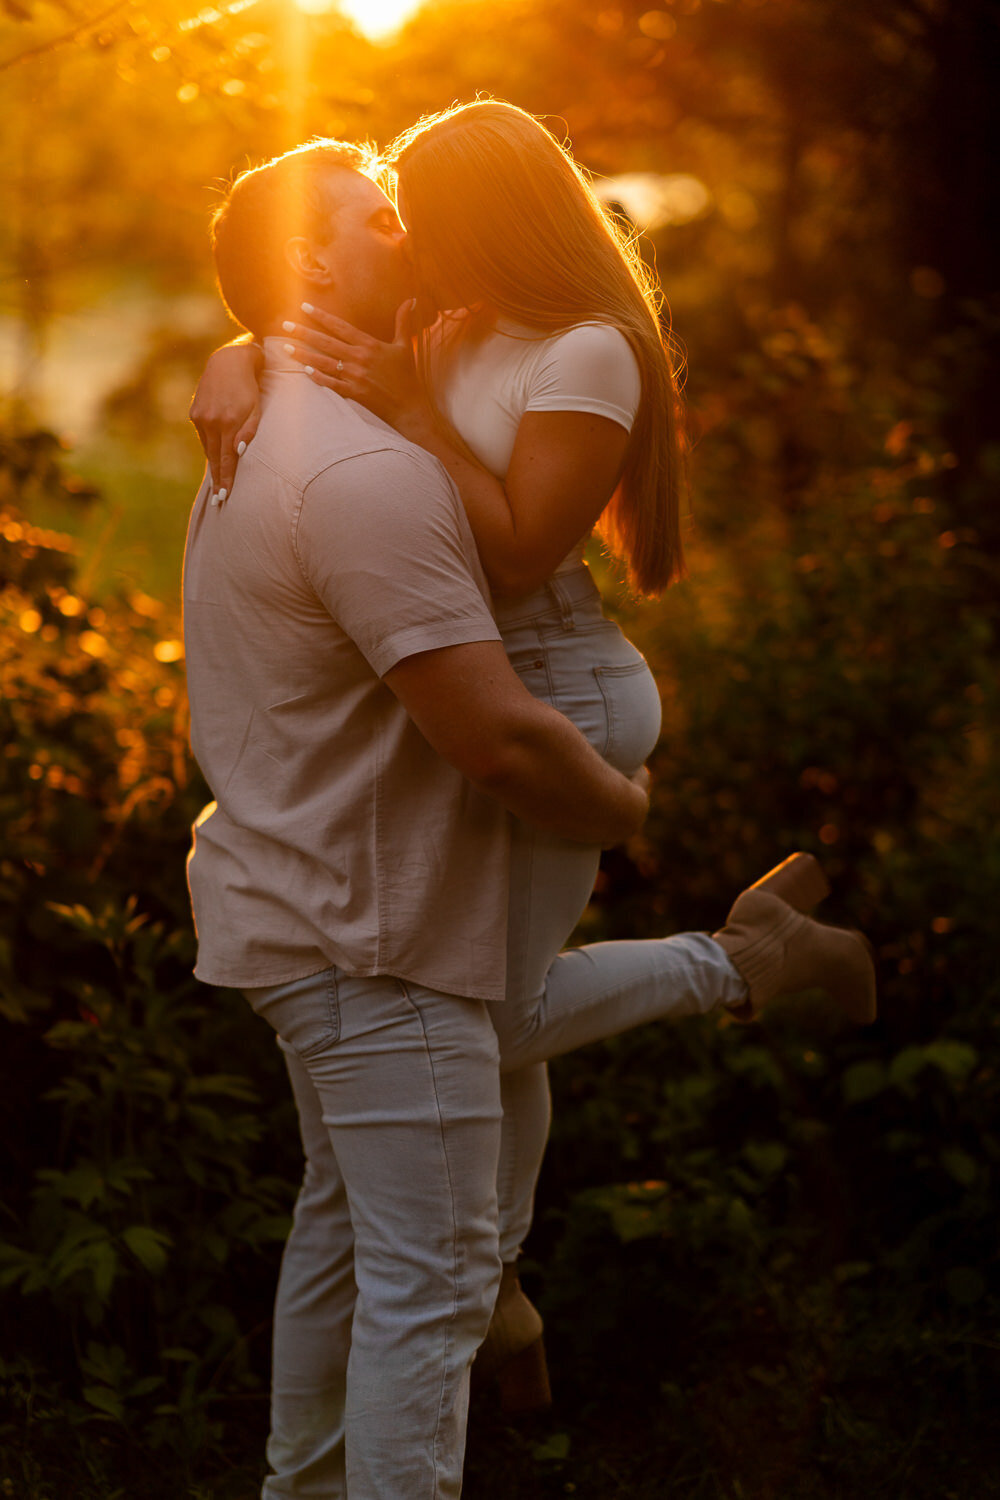 Man and woman kiss during golden hour in Eagan, Minnesota.